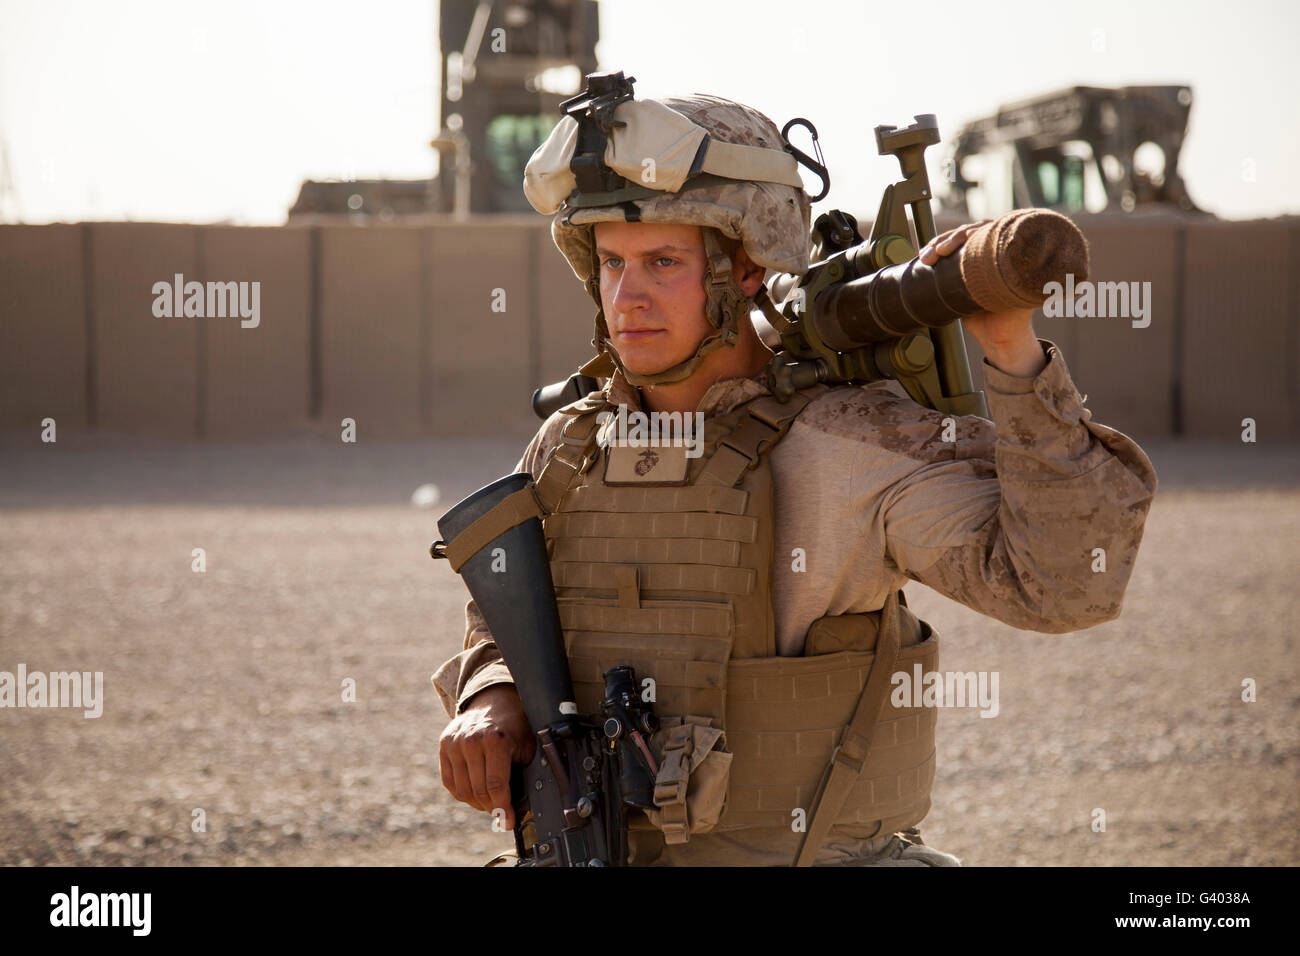 A mortarman with the U.S. Marines at Camp Leatherneck, Afghanistan. Stock Photo